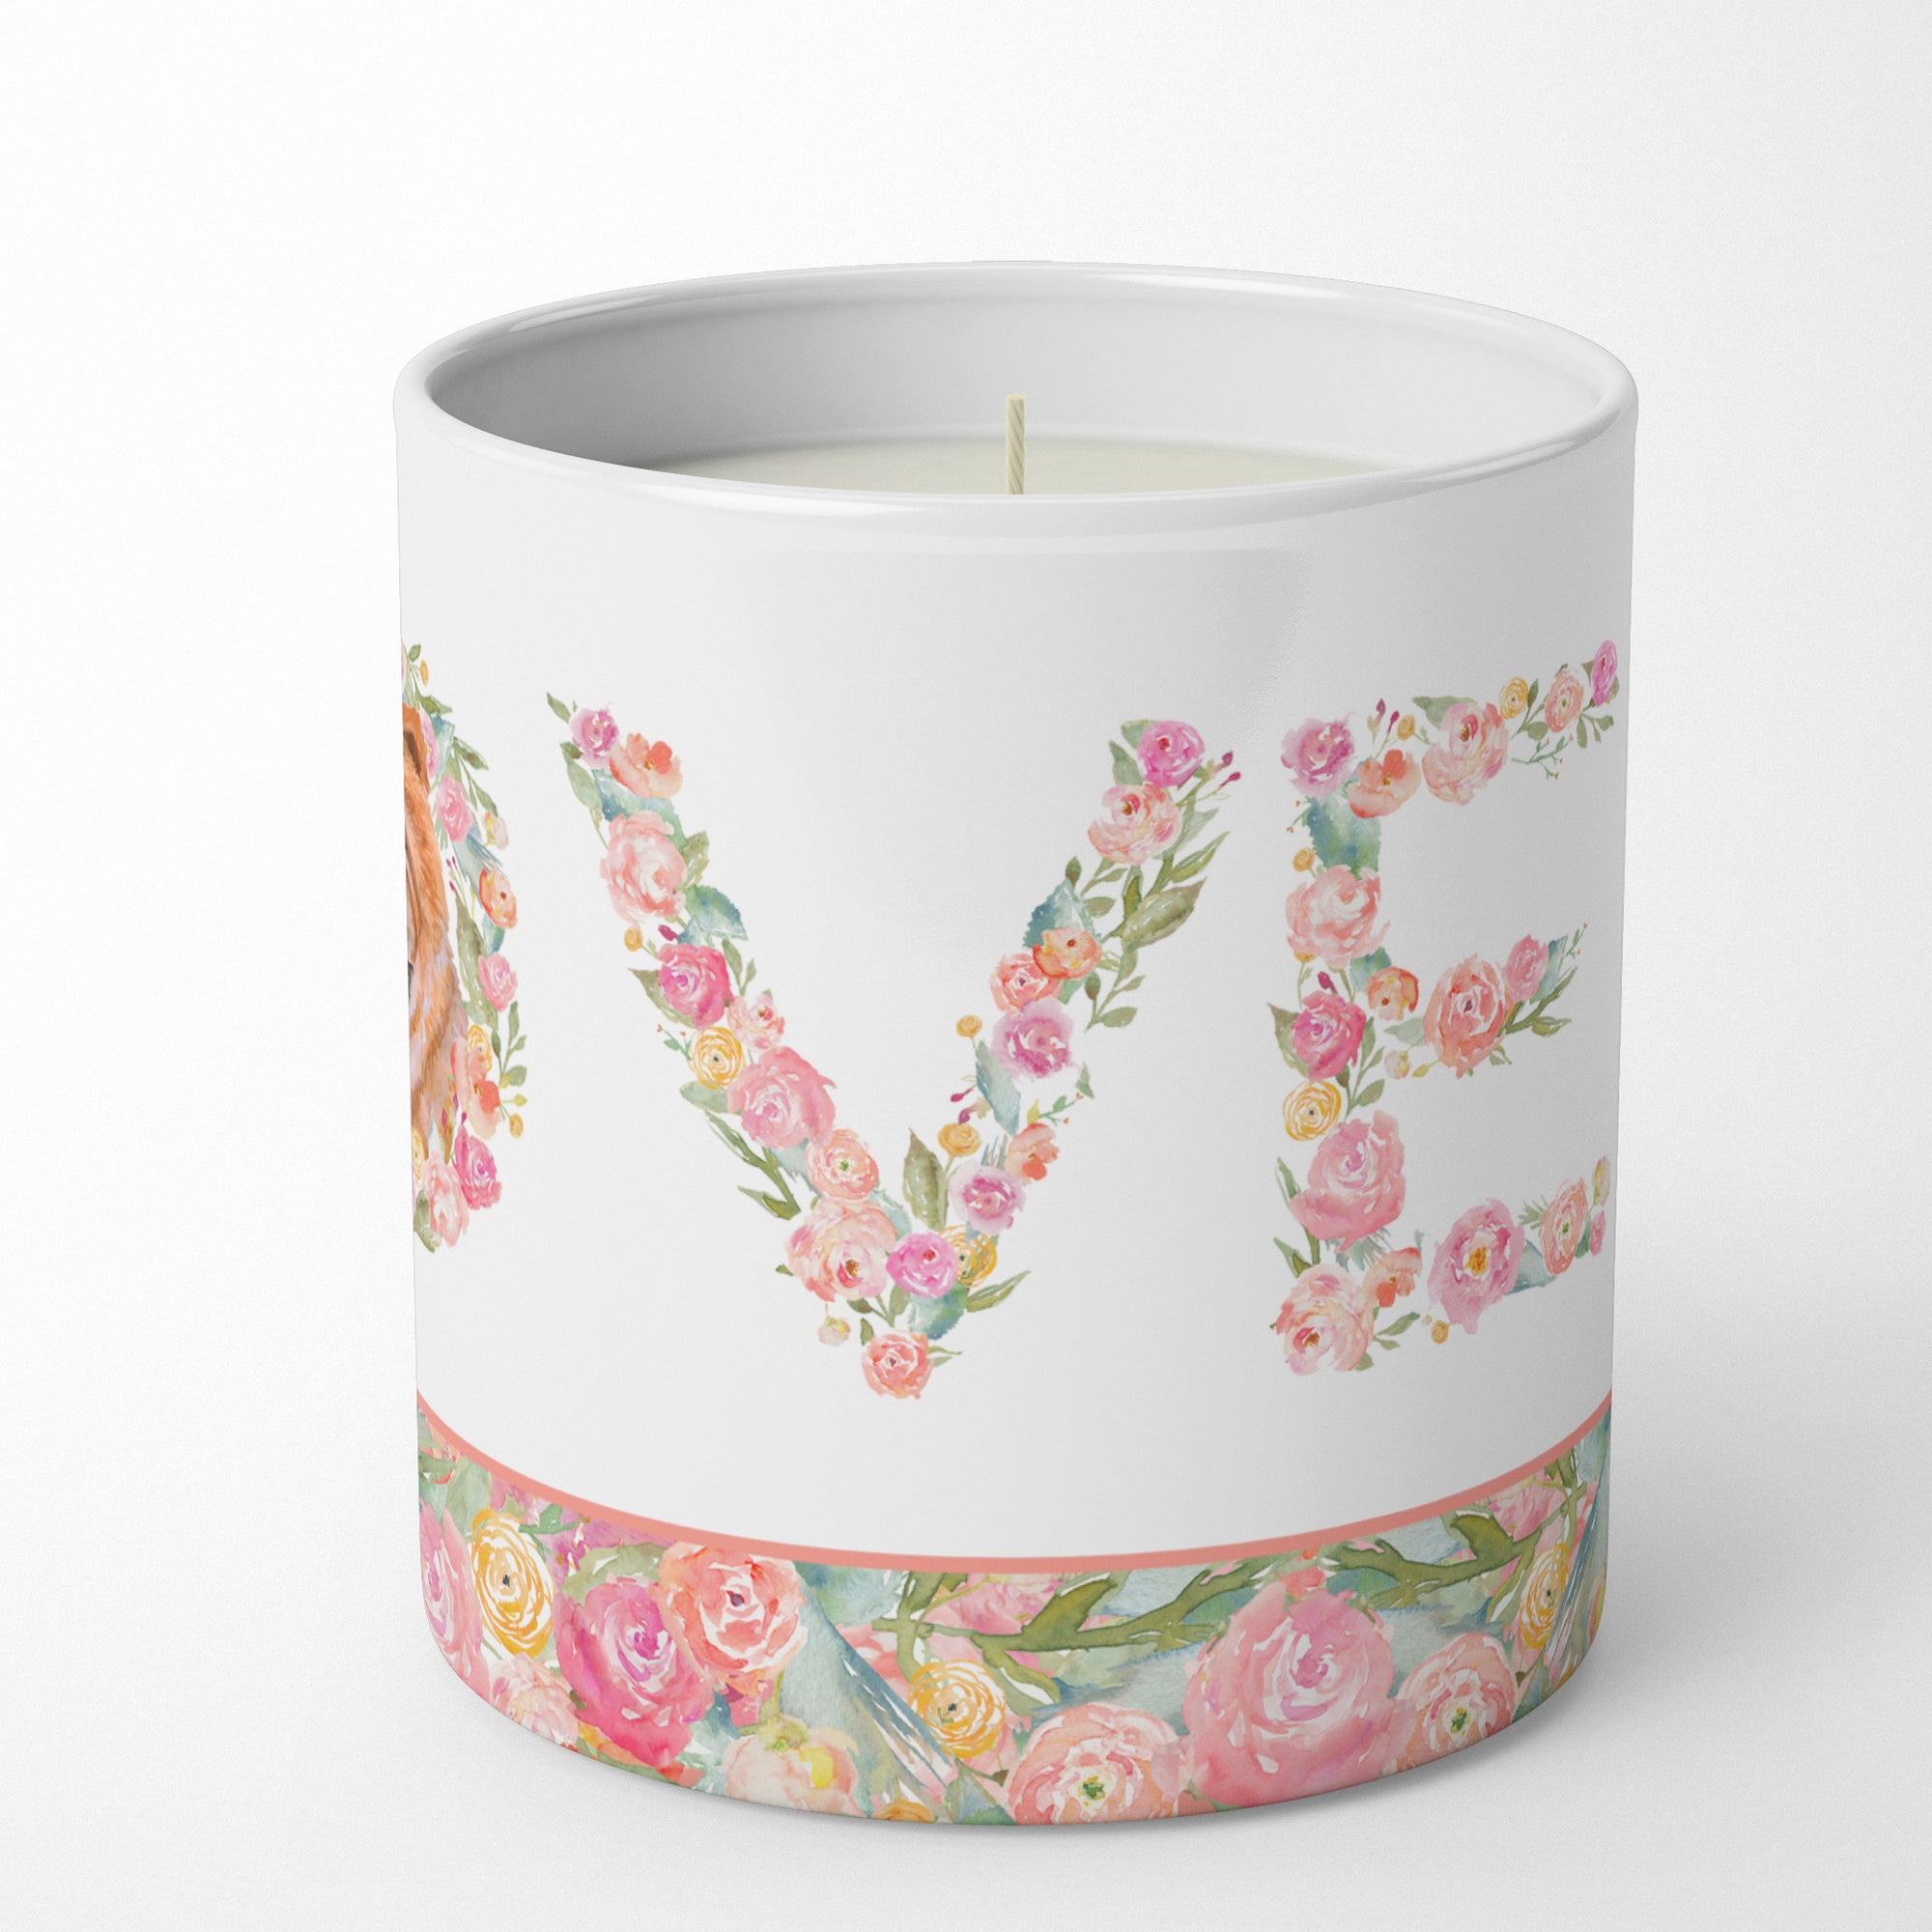 Chow Chow Love 10 oz Decorative Soy Candle - the-store.com